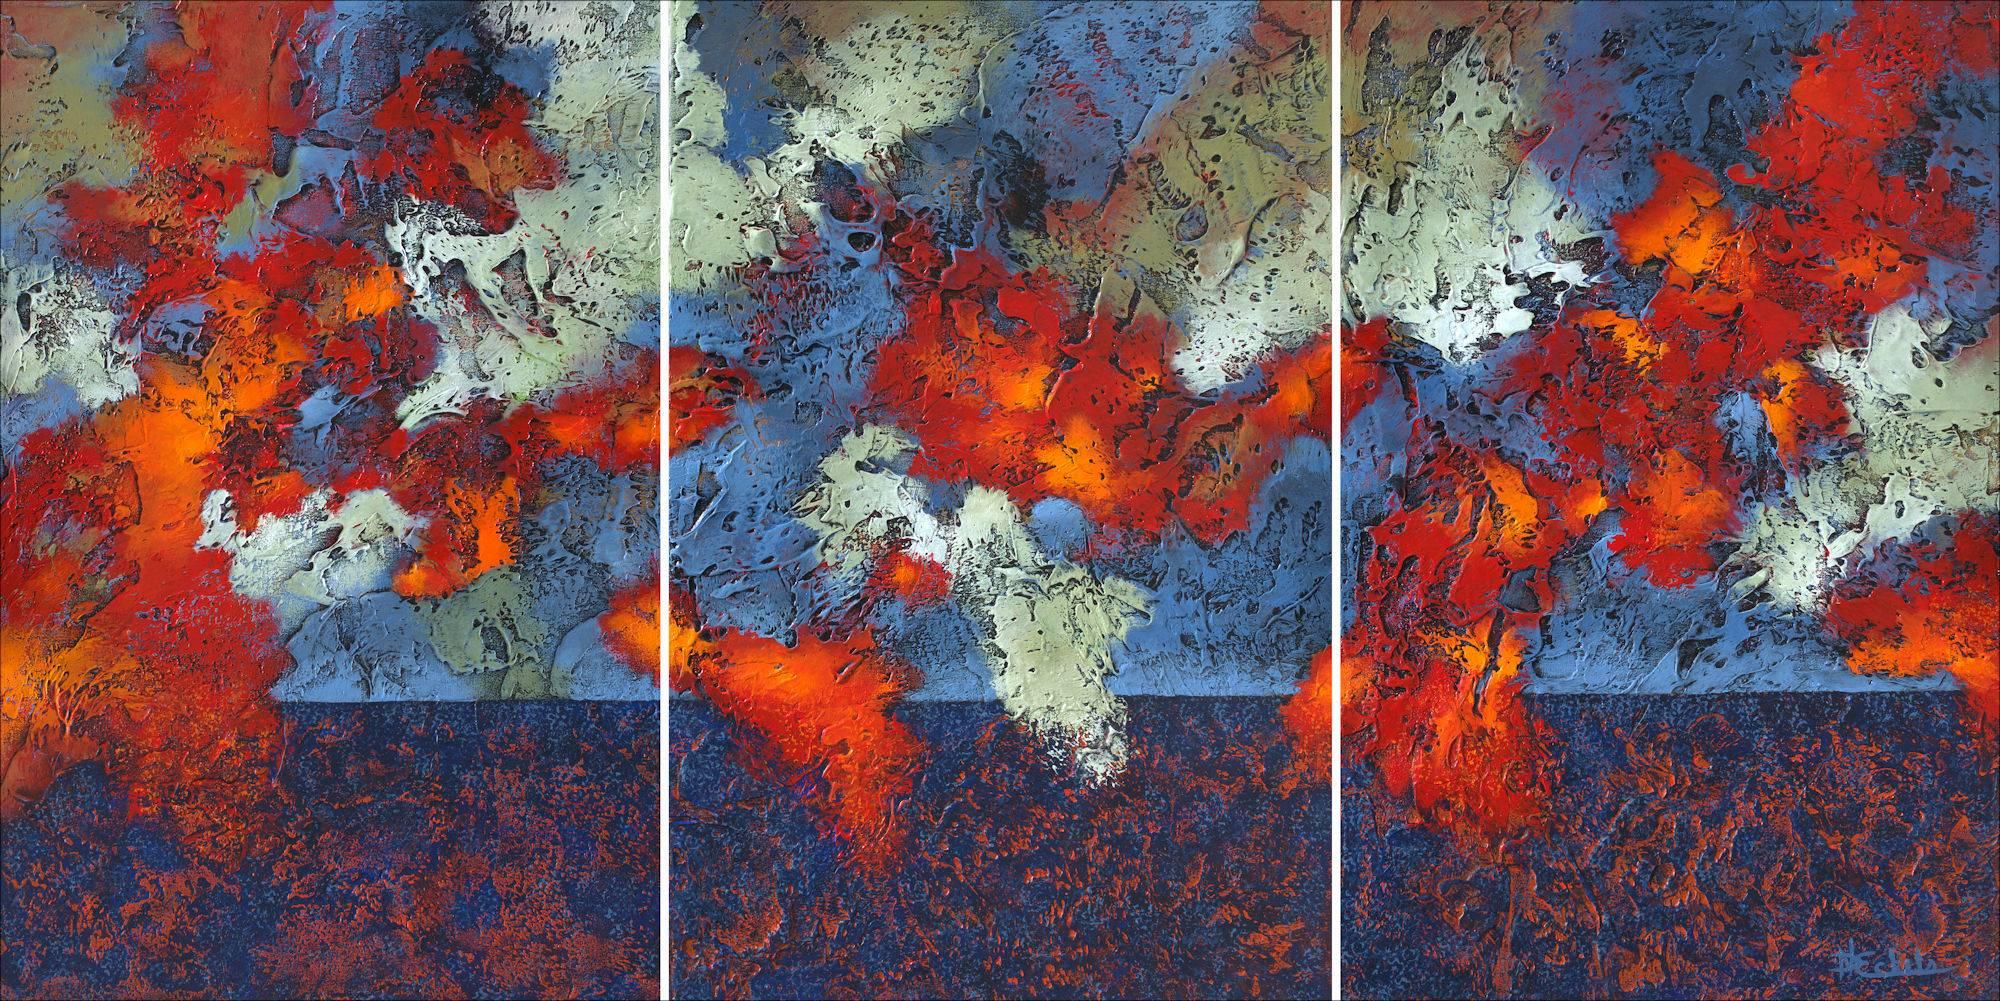 "Ridgeline Sundown" Nancy Eckels large abstract triptych with texture and reds